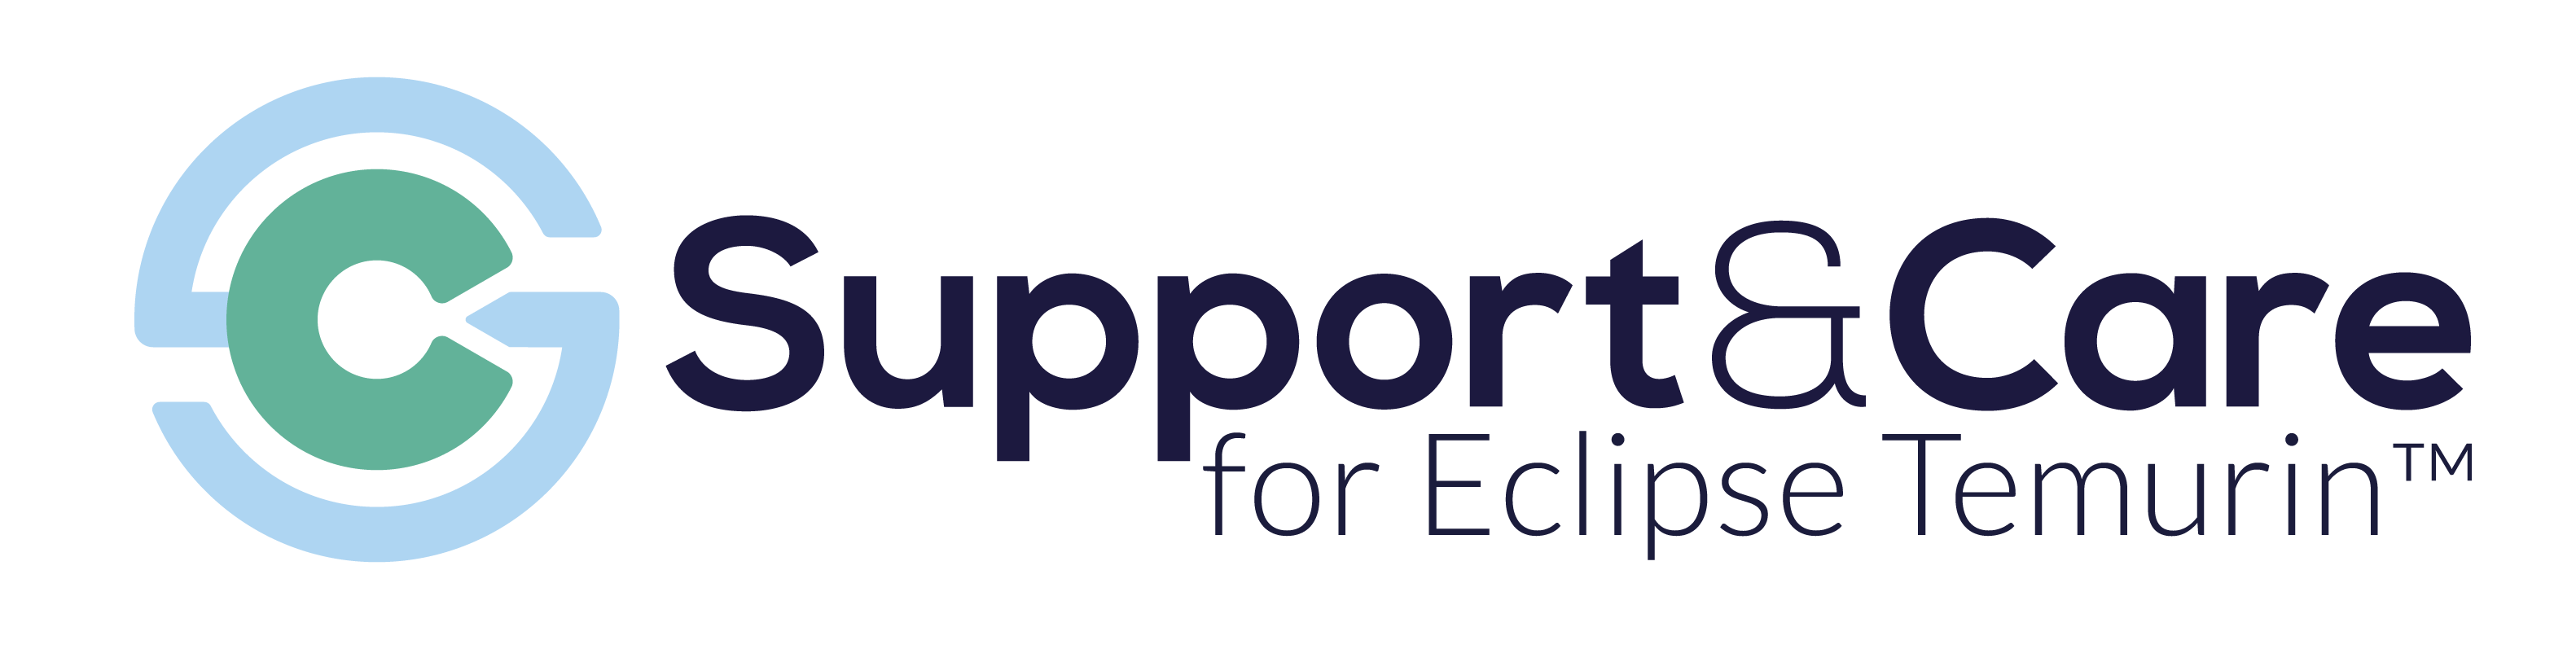 Eclipse Temurin Support & Care